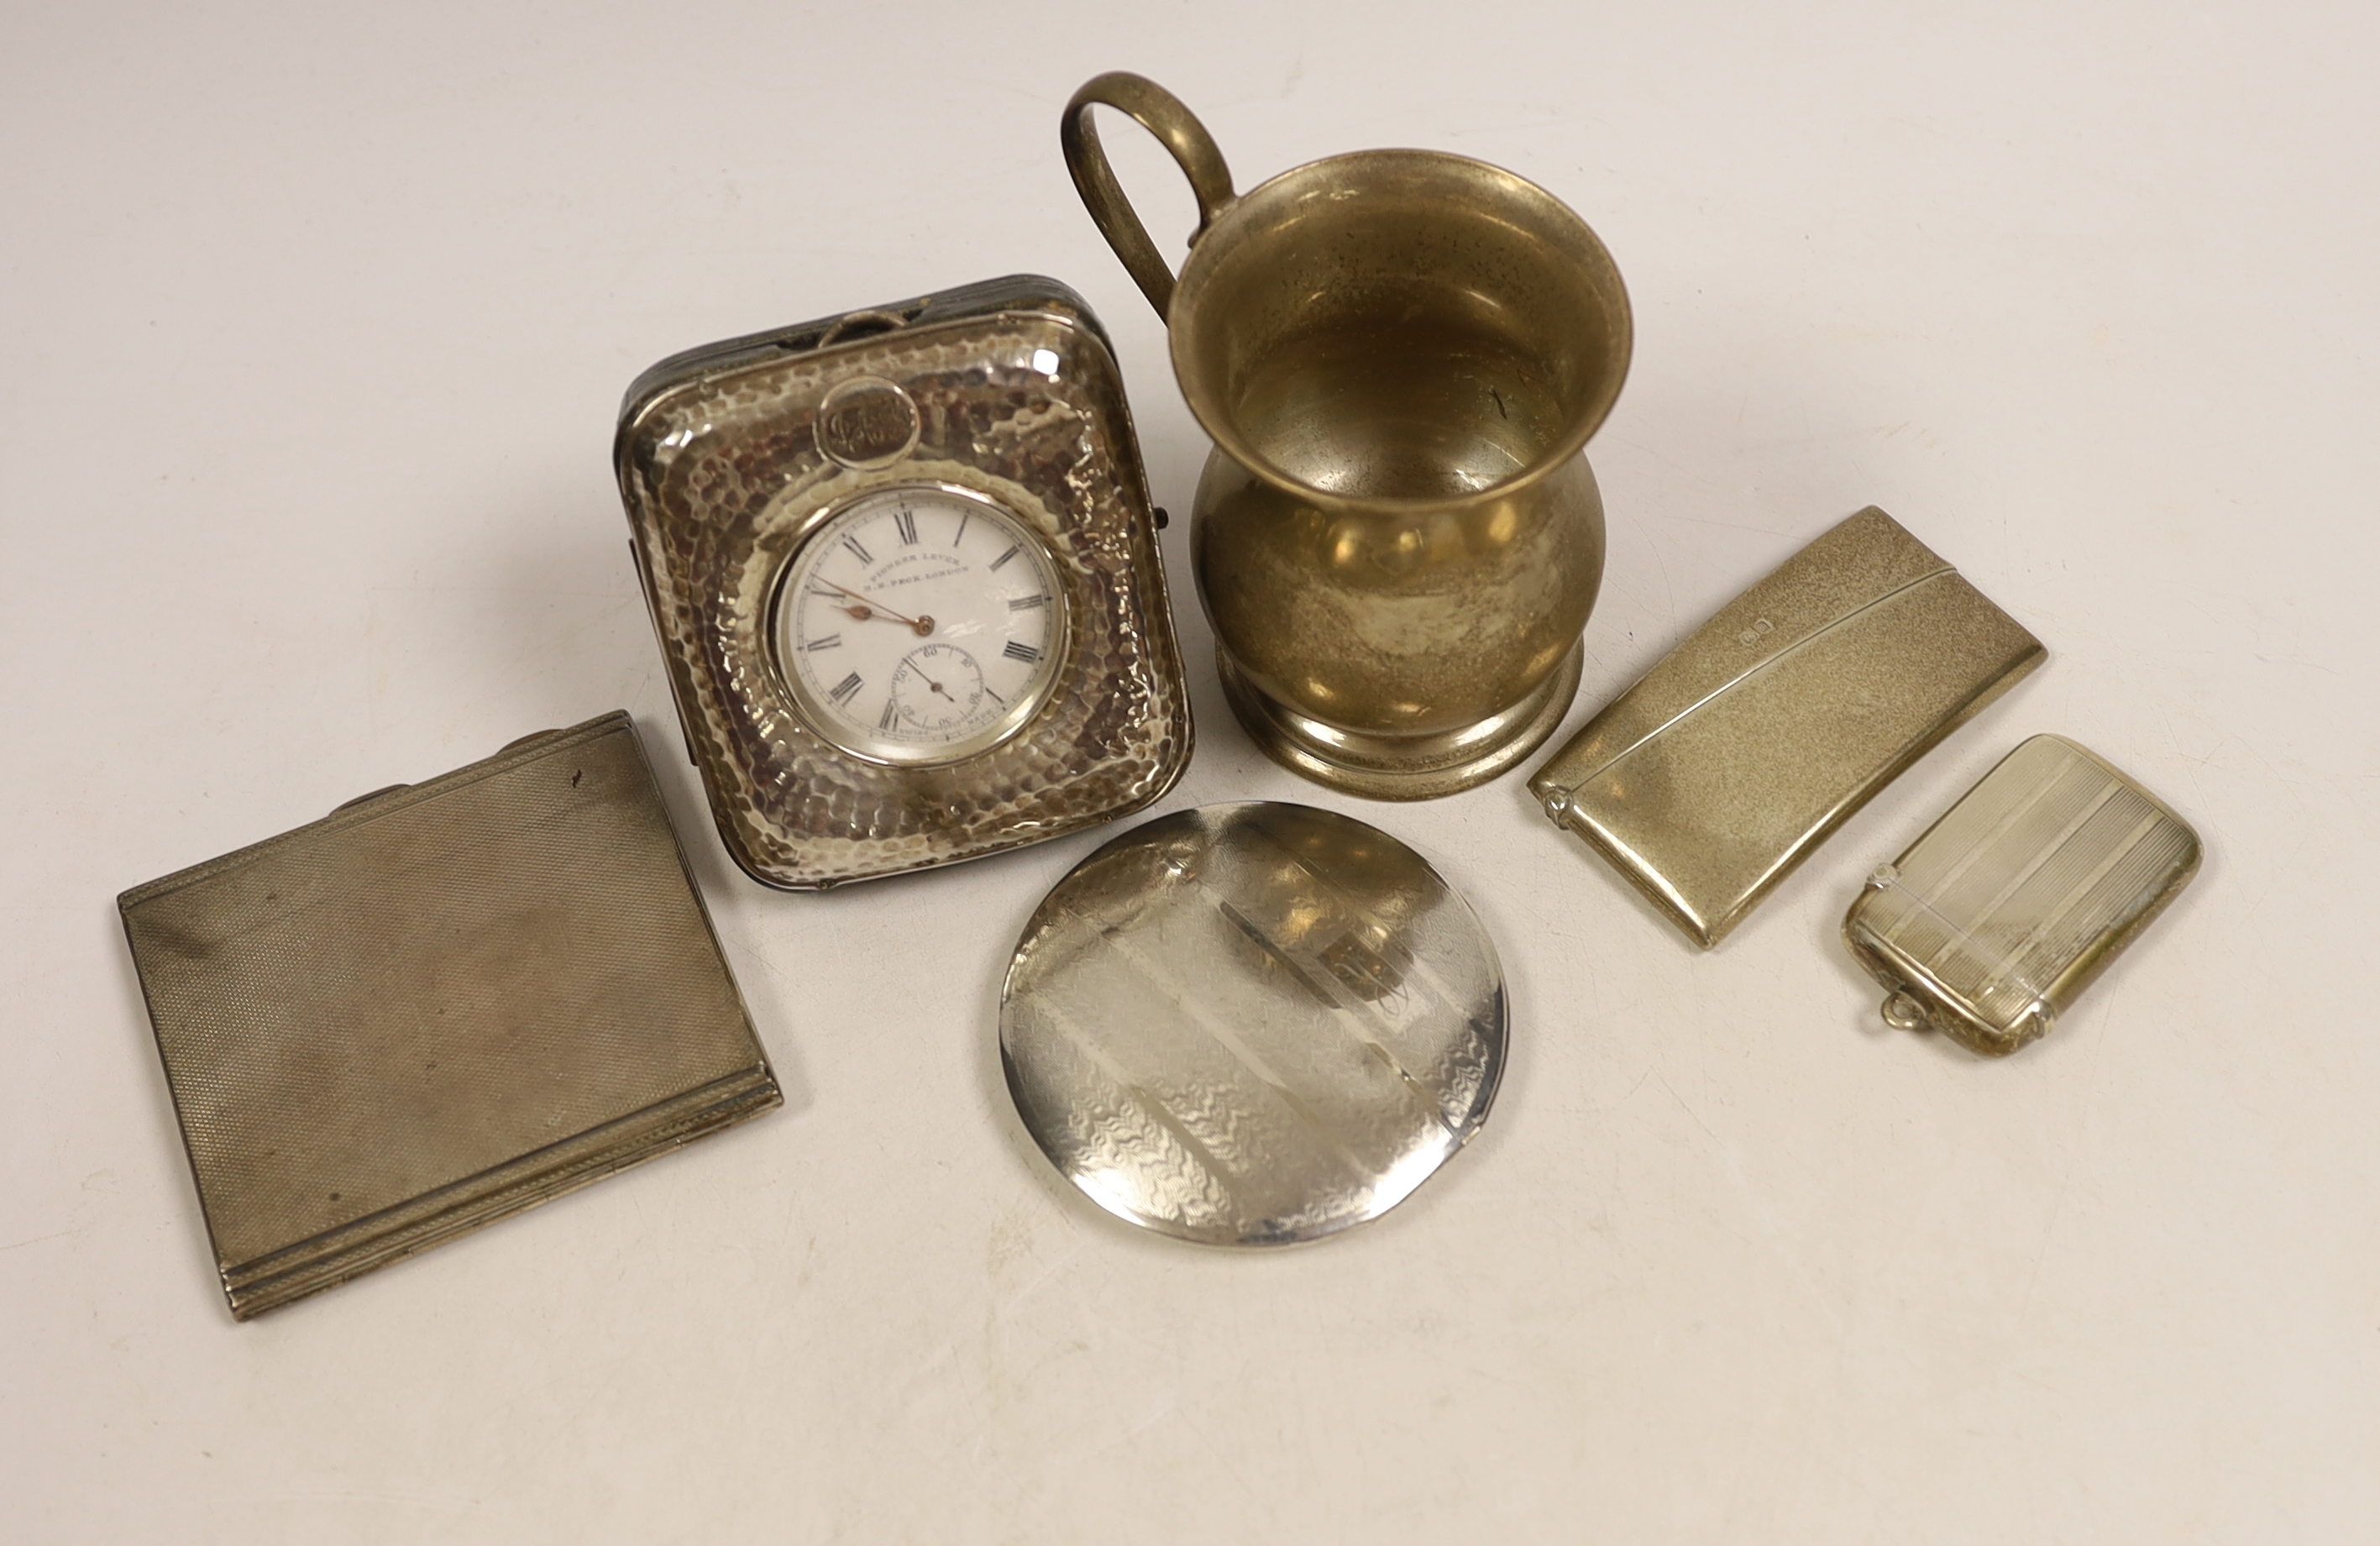 A George V silver baluster christening mug, height 9.7cm, an Edwardian silver mounted travelling watch case, containing a silver pocket watch by Peck of London, a silver card case, silver cigarette case, silver vesta cas